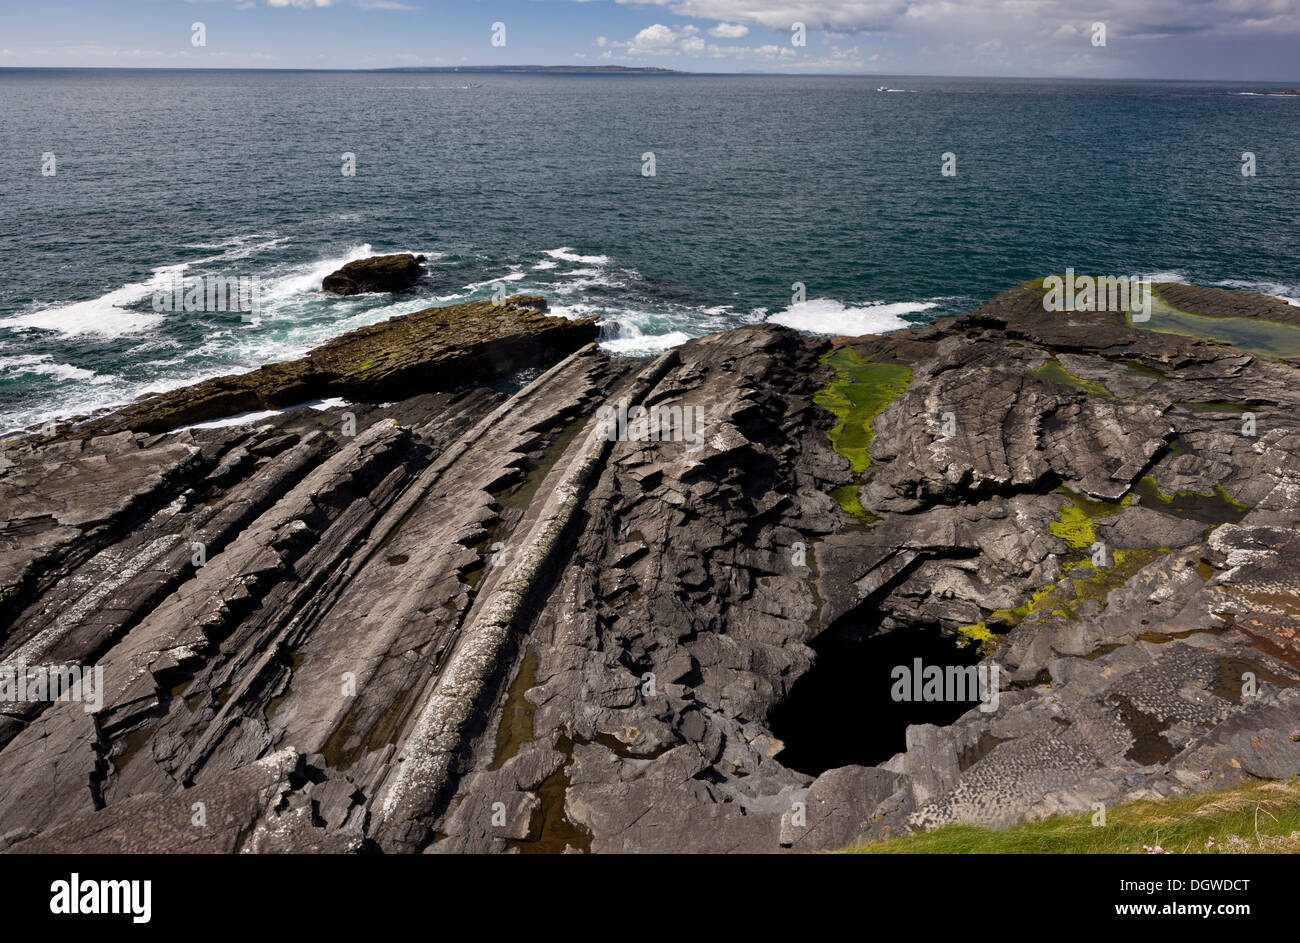 Looking north from cliffs of Moher across the sandstone and siltstone shore towards Doolin and Galway Bay, The Burren, Ireland Stock Photo